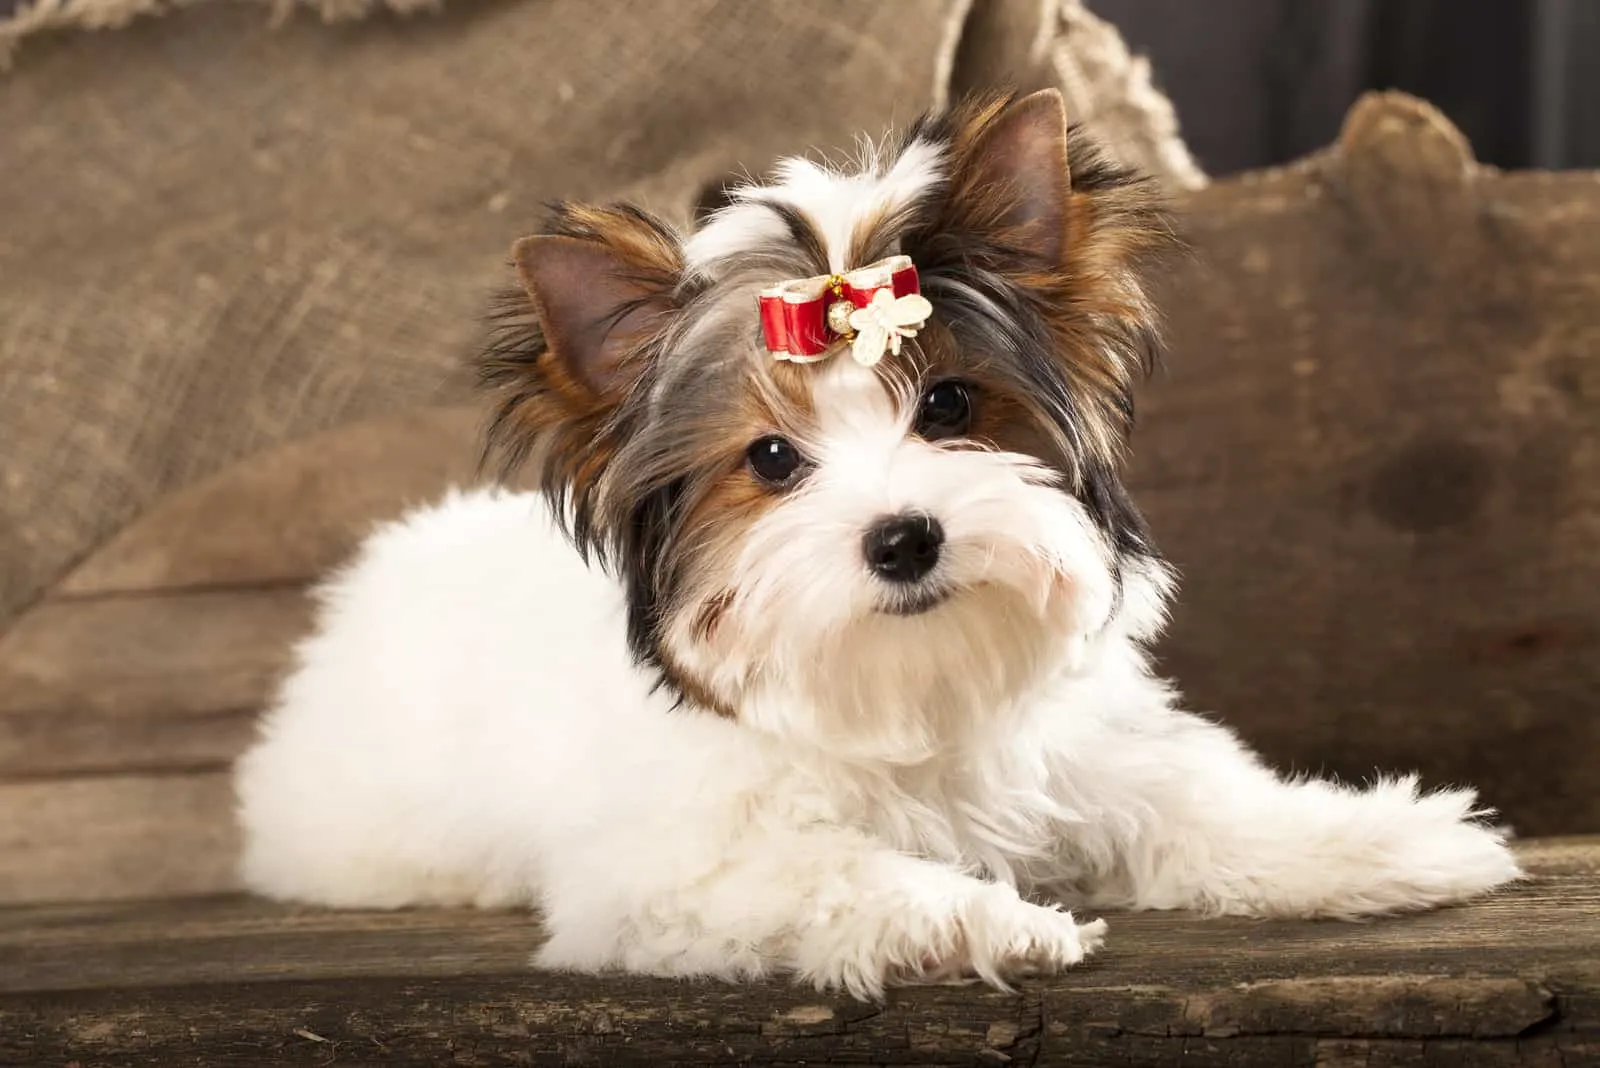 Biewer Terrier with a bow in hair